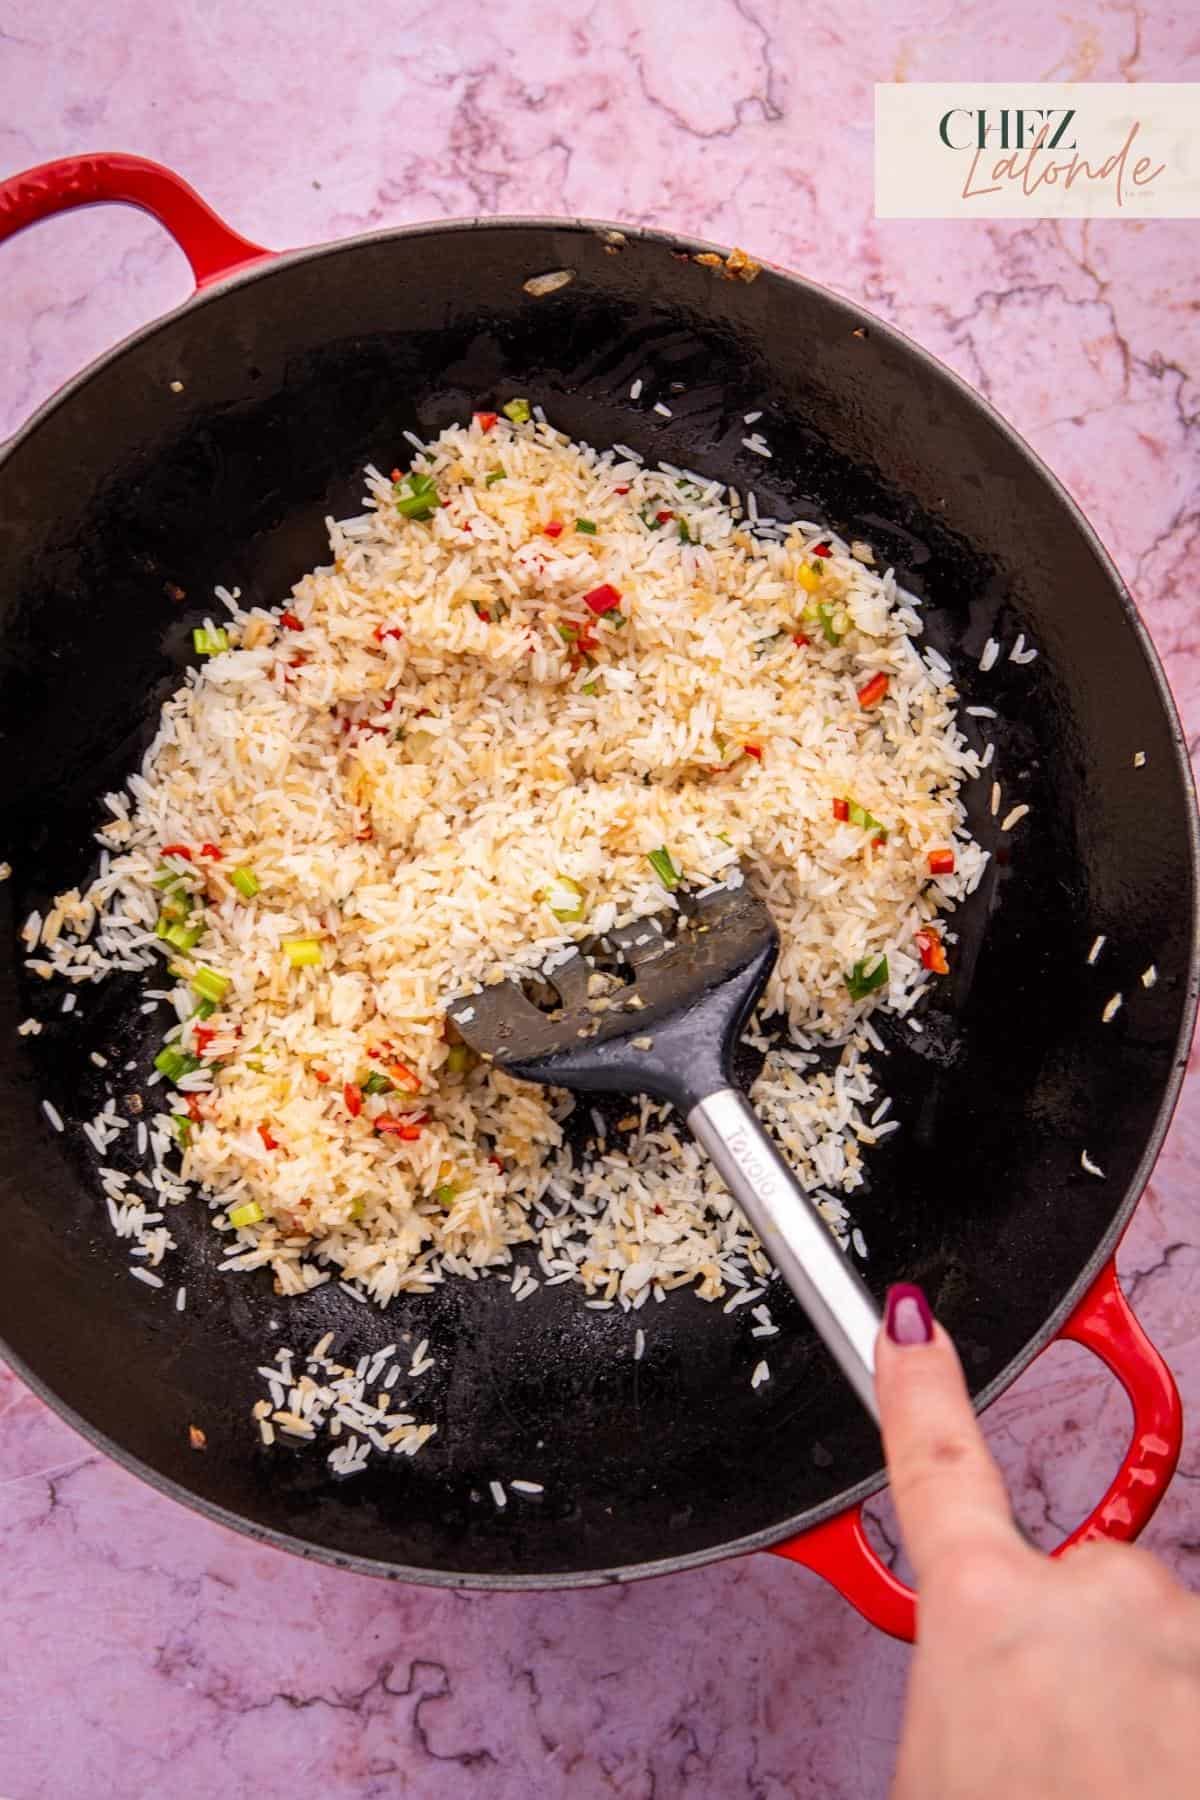 Mix in the rice, breaking up clumps with a spatula. Cook for about 2 minutes, and keep stirring to prevent sticking.